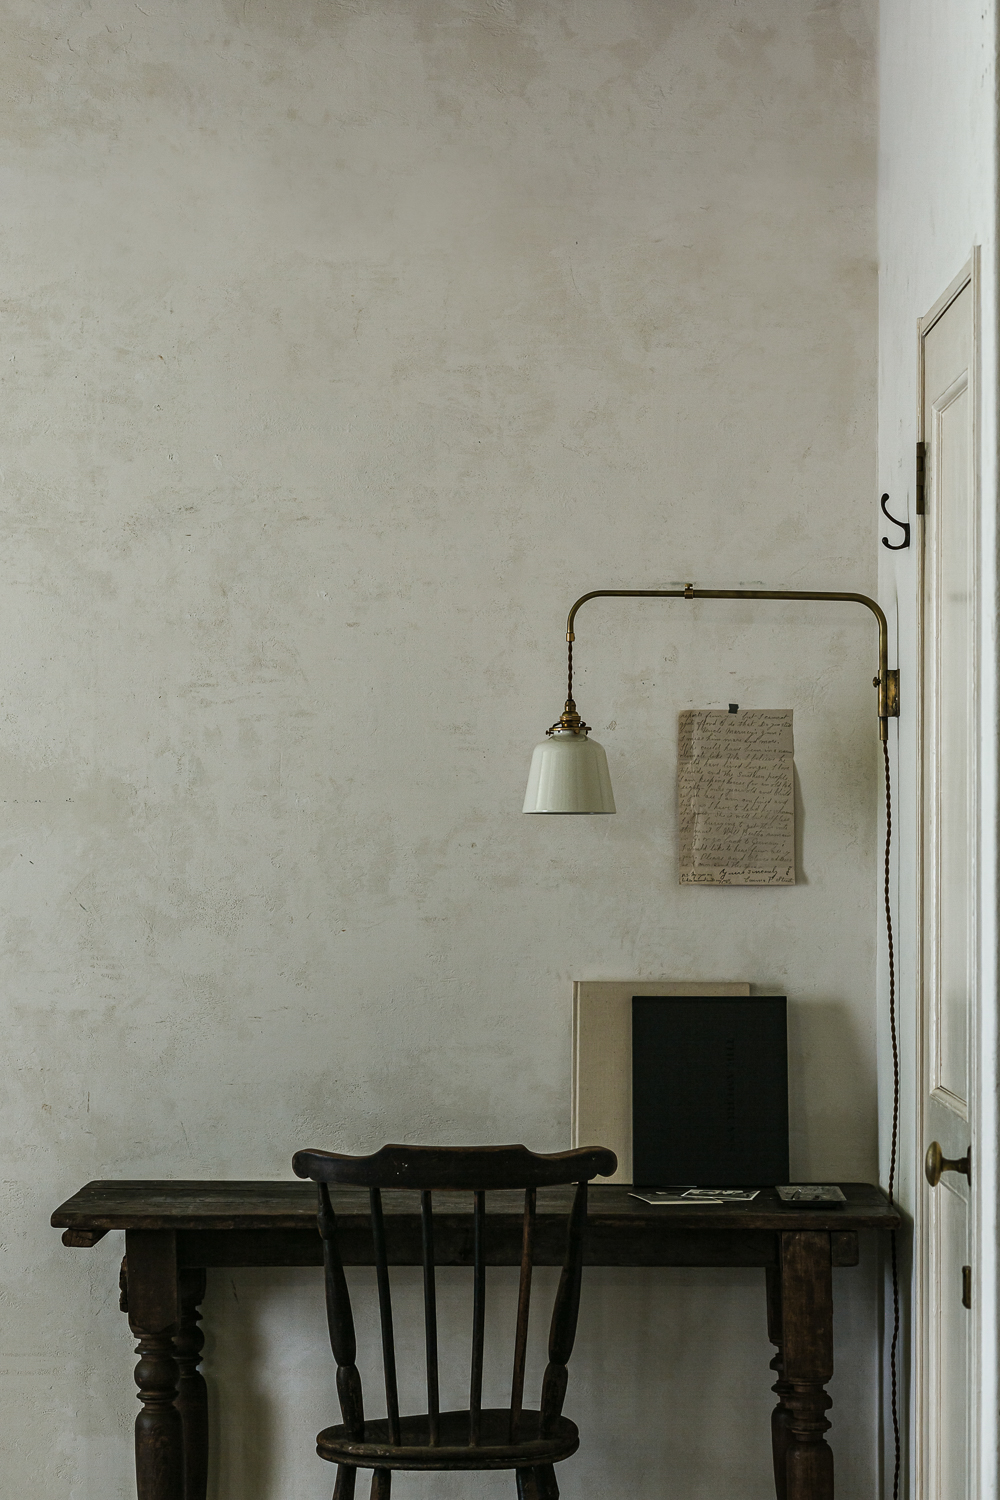 a brass hanger mini light with a movable arm and baba enamel shade. 20